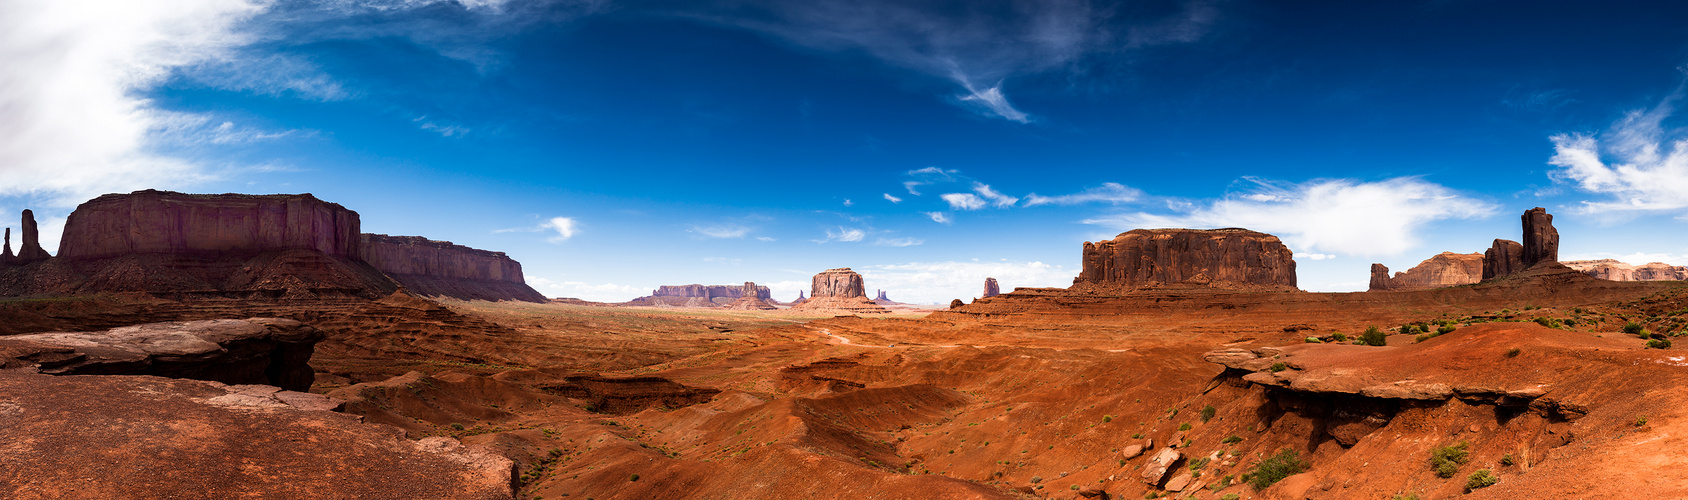 Monument Valley II  (9f-Pano) 